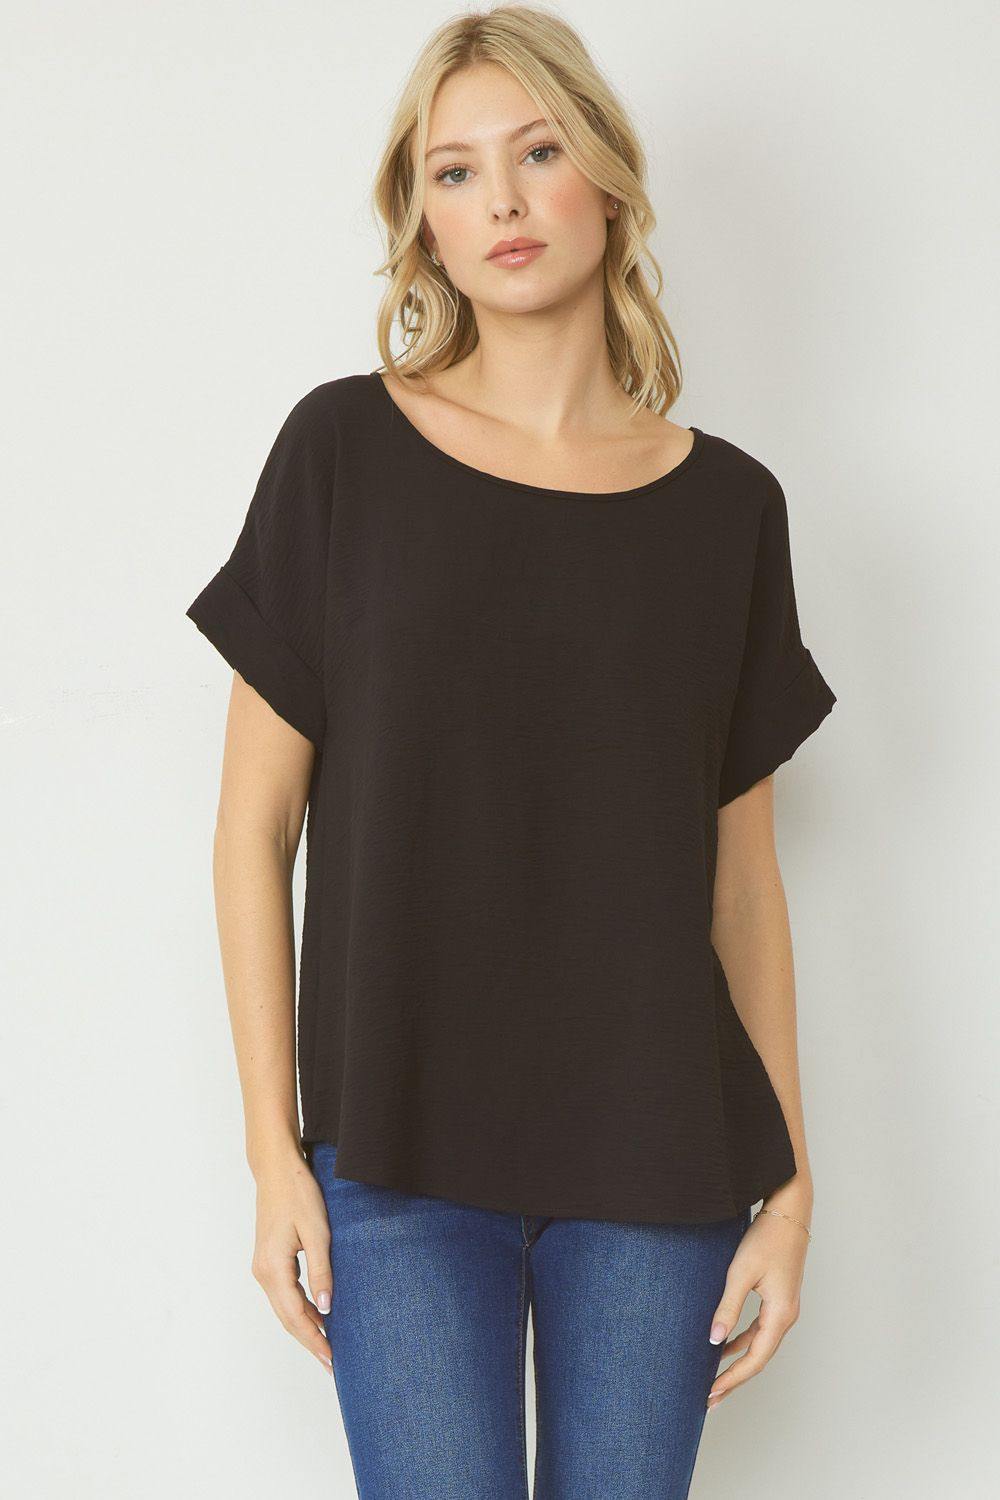 entro clothing brand boutique cuff sleeve scoop neck black